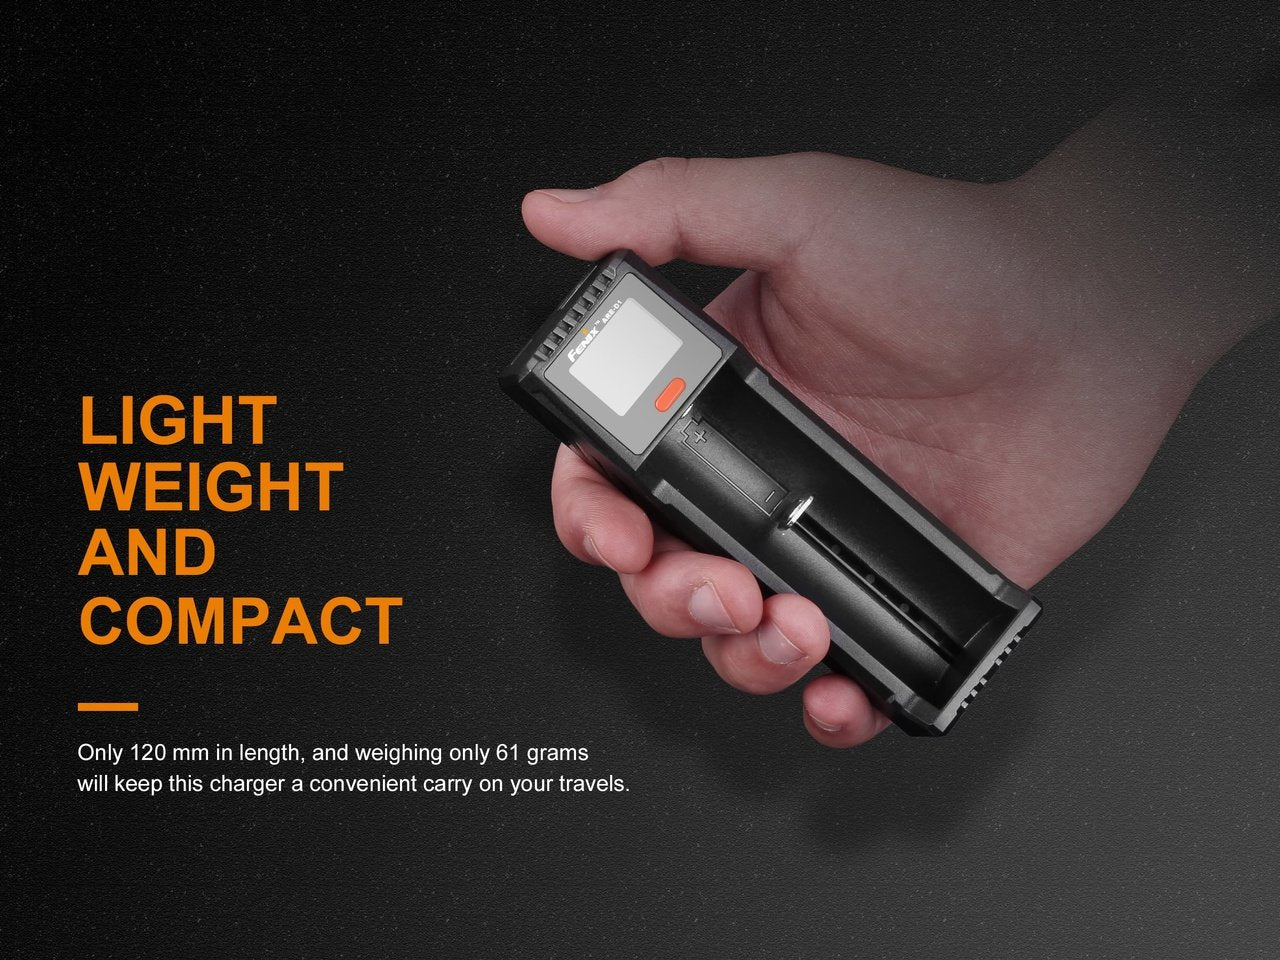 ARE-D2 lightweight and compact